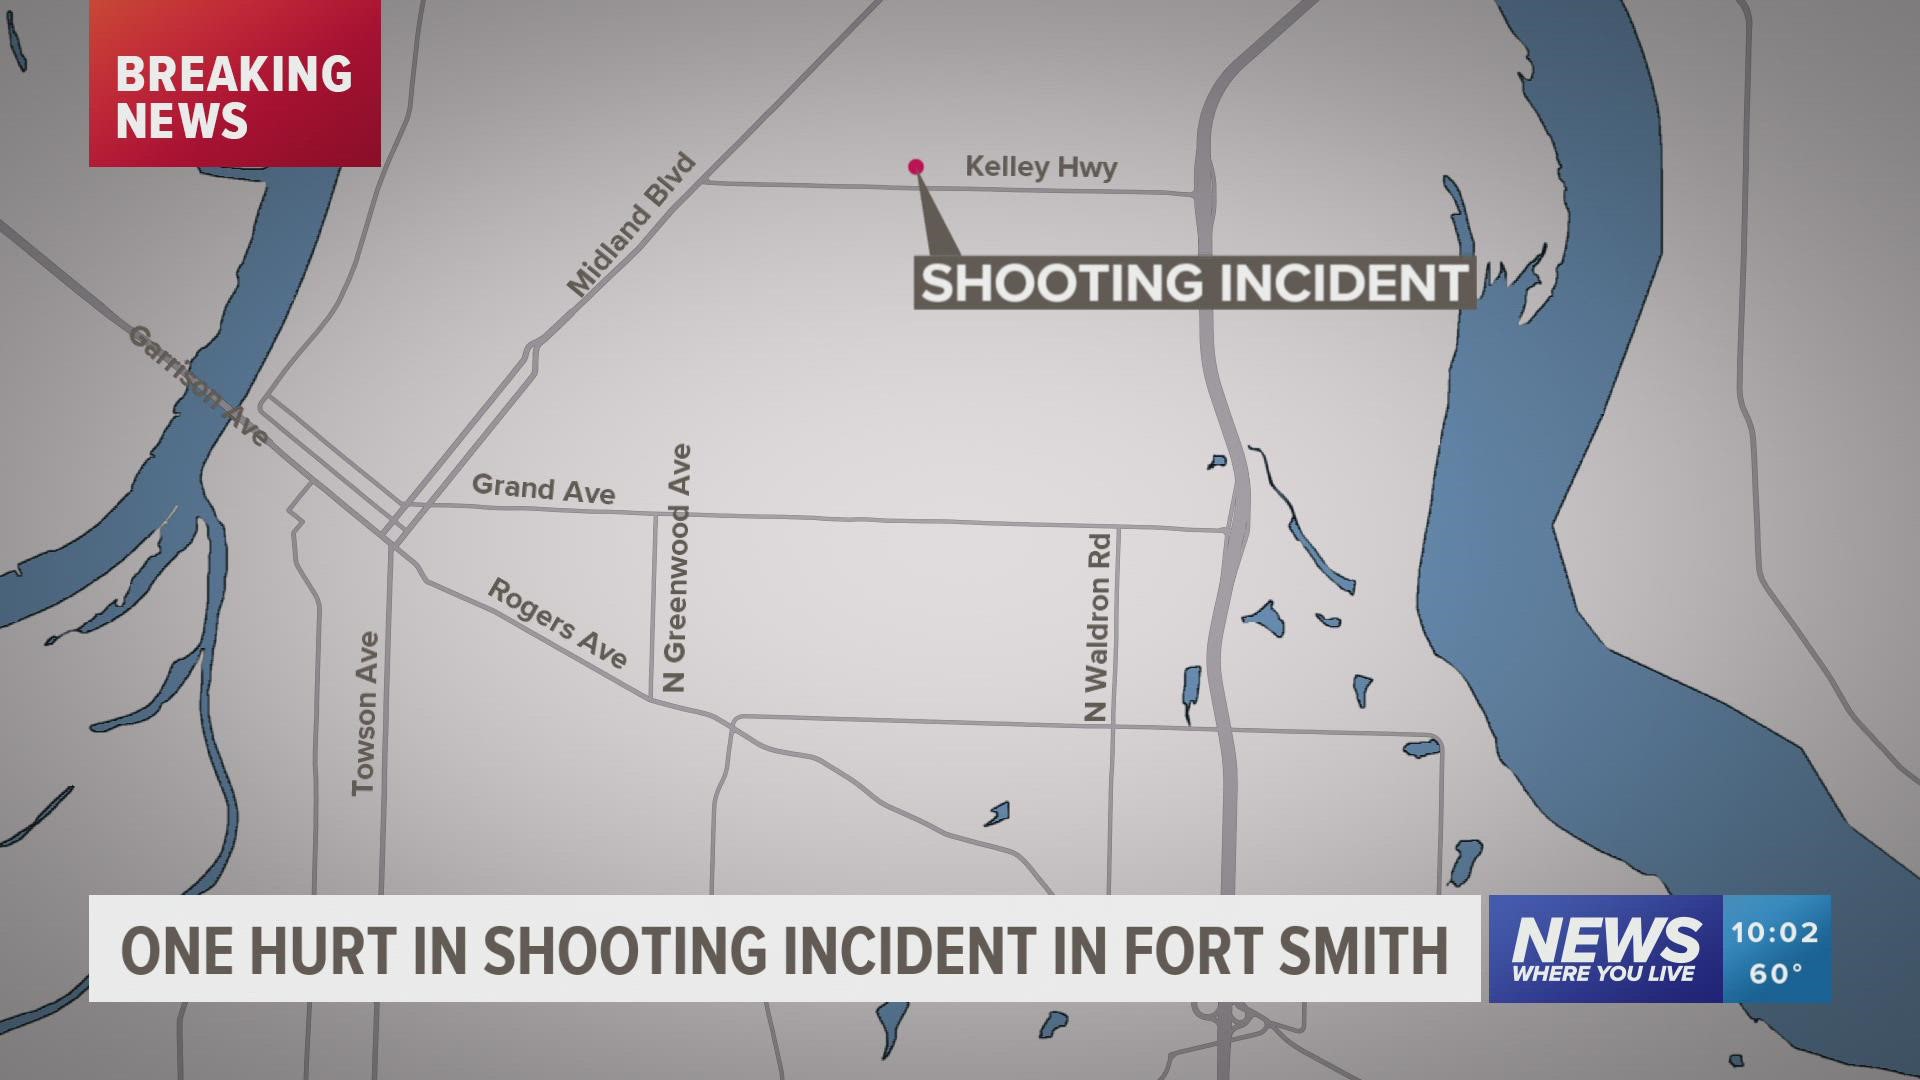 Fort Smith Police are investigating a shooting incident in the 2600 block of N. 41st St. where one victim was reported having minor non-life-threatening injuries.